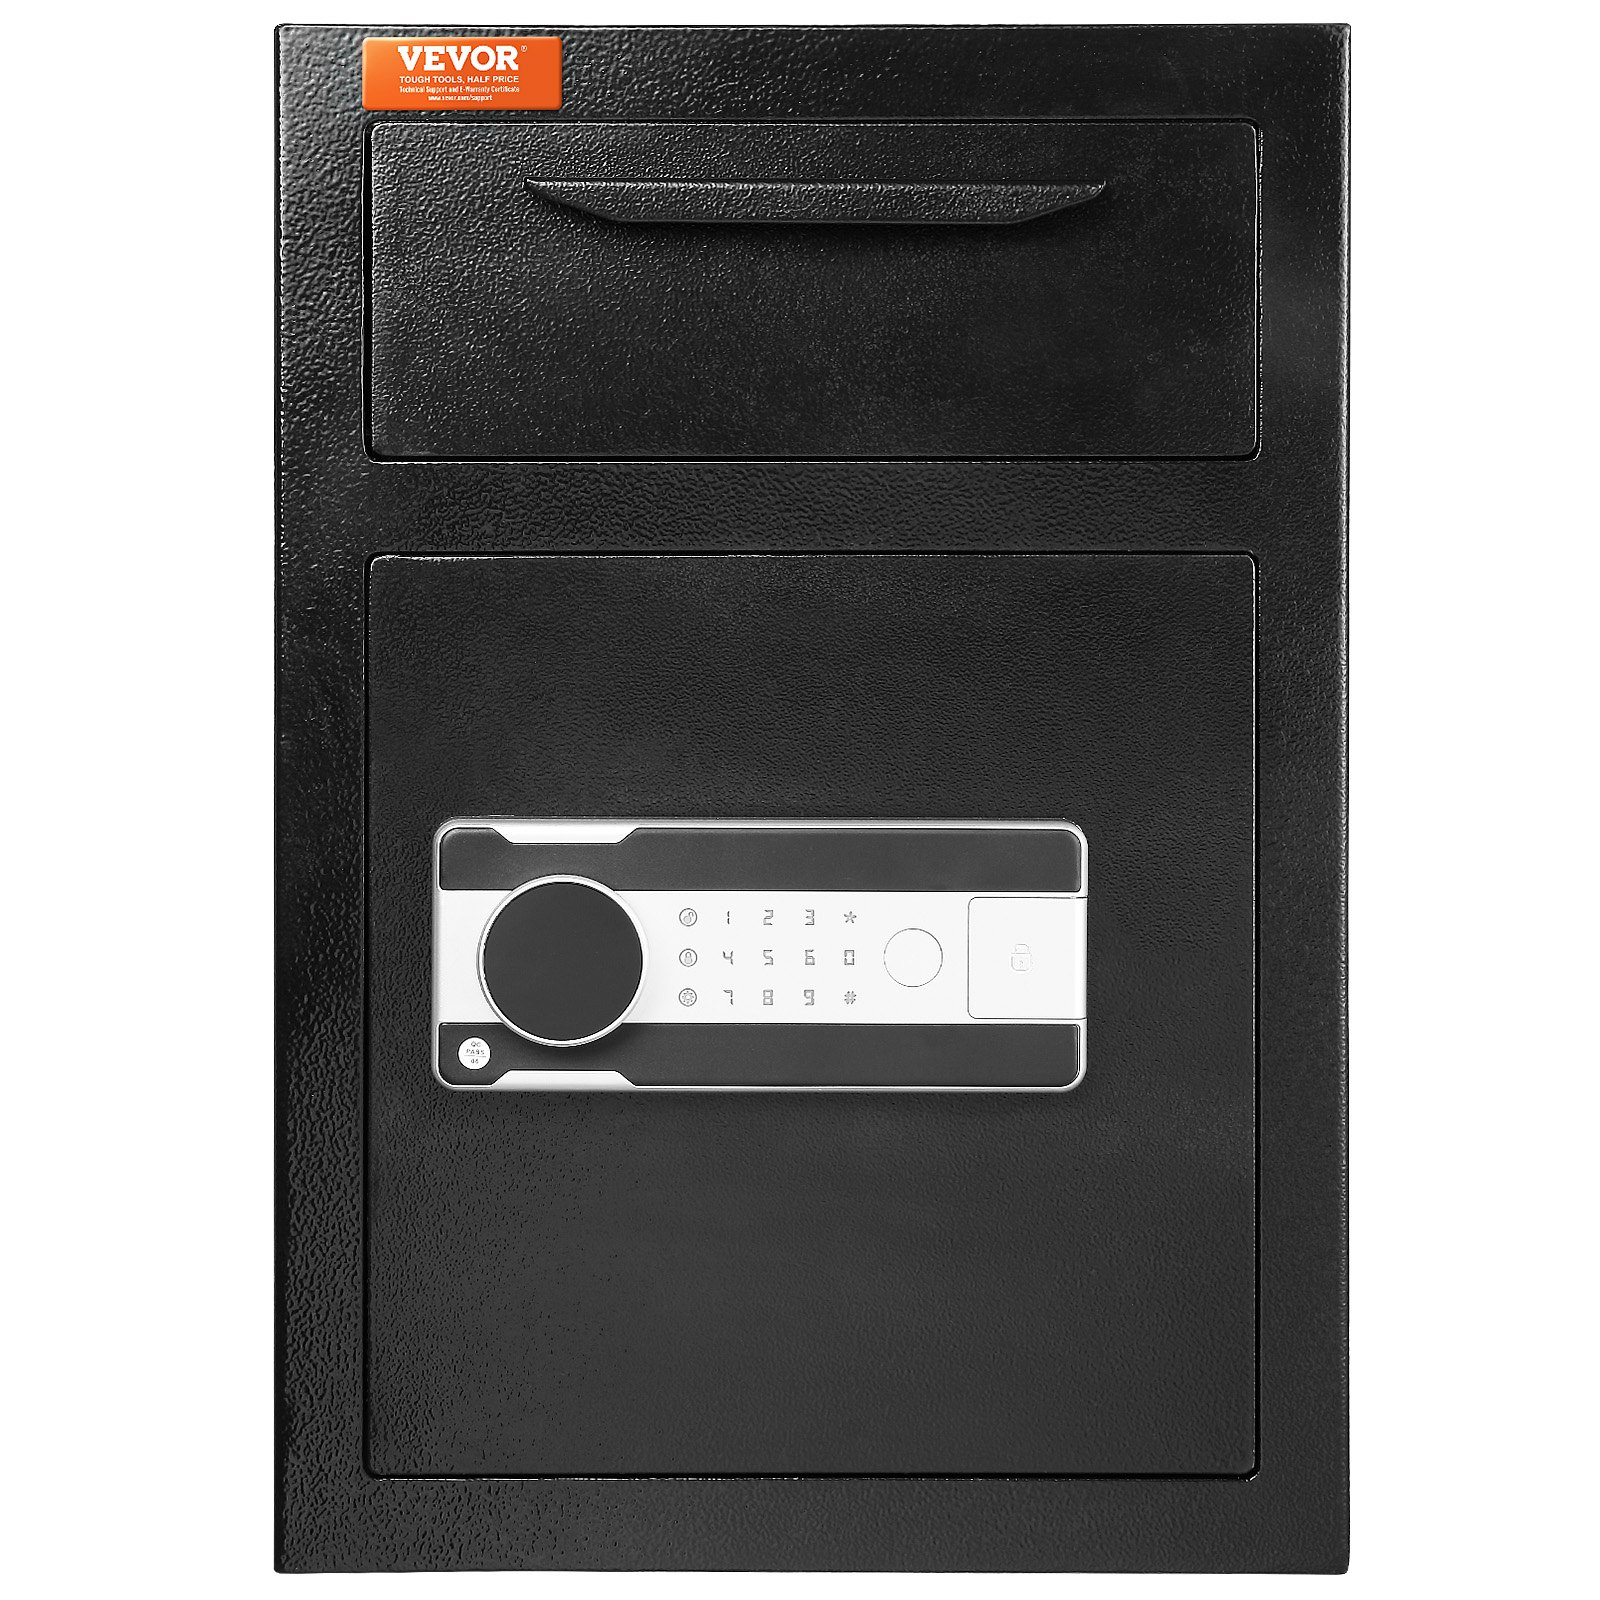 VEVOR 2.5 Cub Depository Safe, Deposit Safe with Drop Slot, Electronic Code Lock and 2 Emergency Keys, 20.27'' x 13.97'' x 13.97'' Business Drop Slot Safe for Cash, Mail in Home, Hotel, Office, Goodies N Stuff